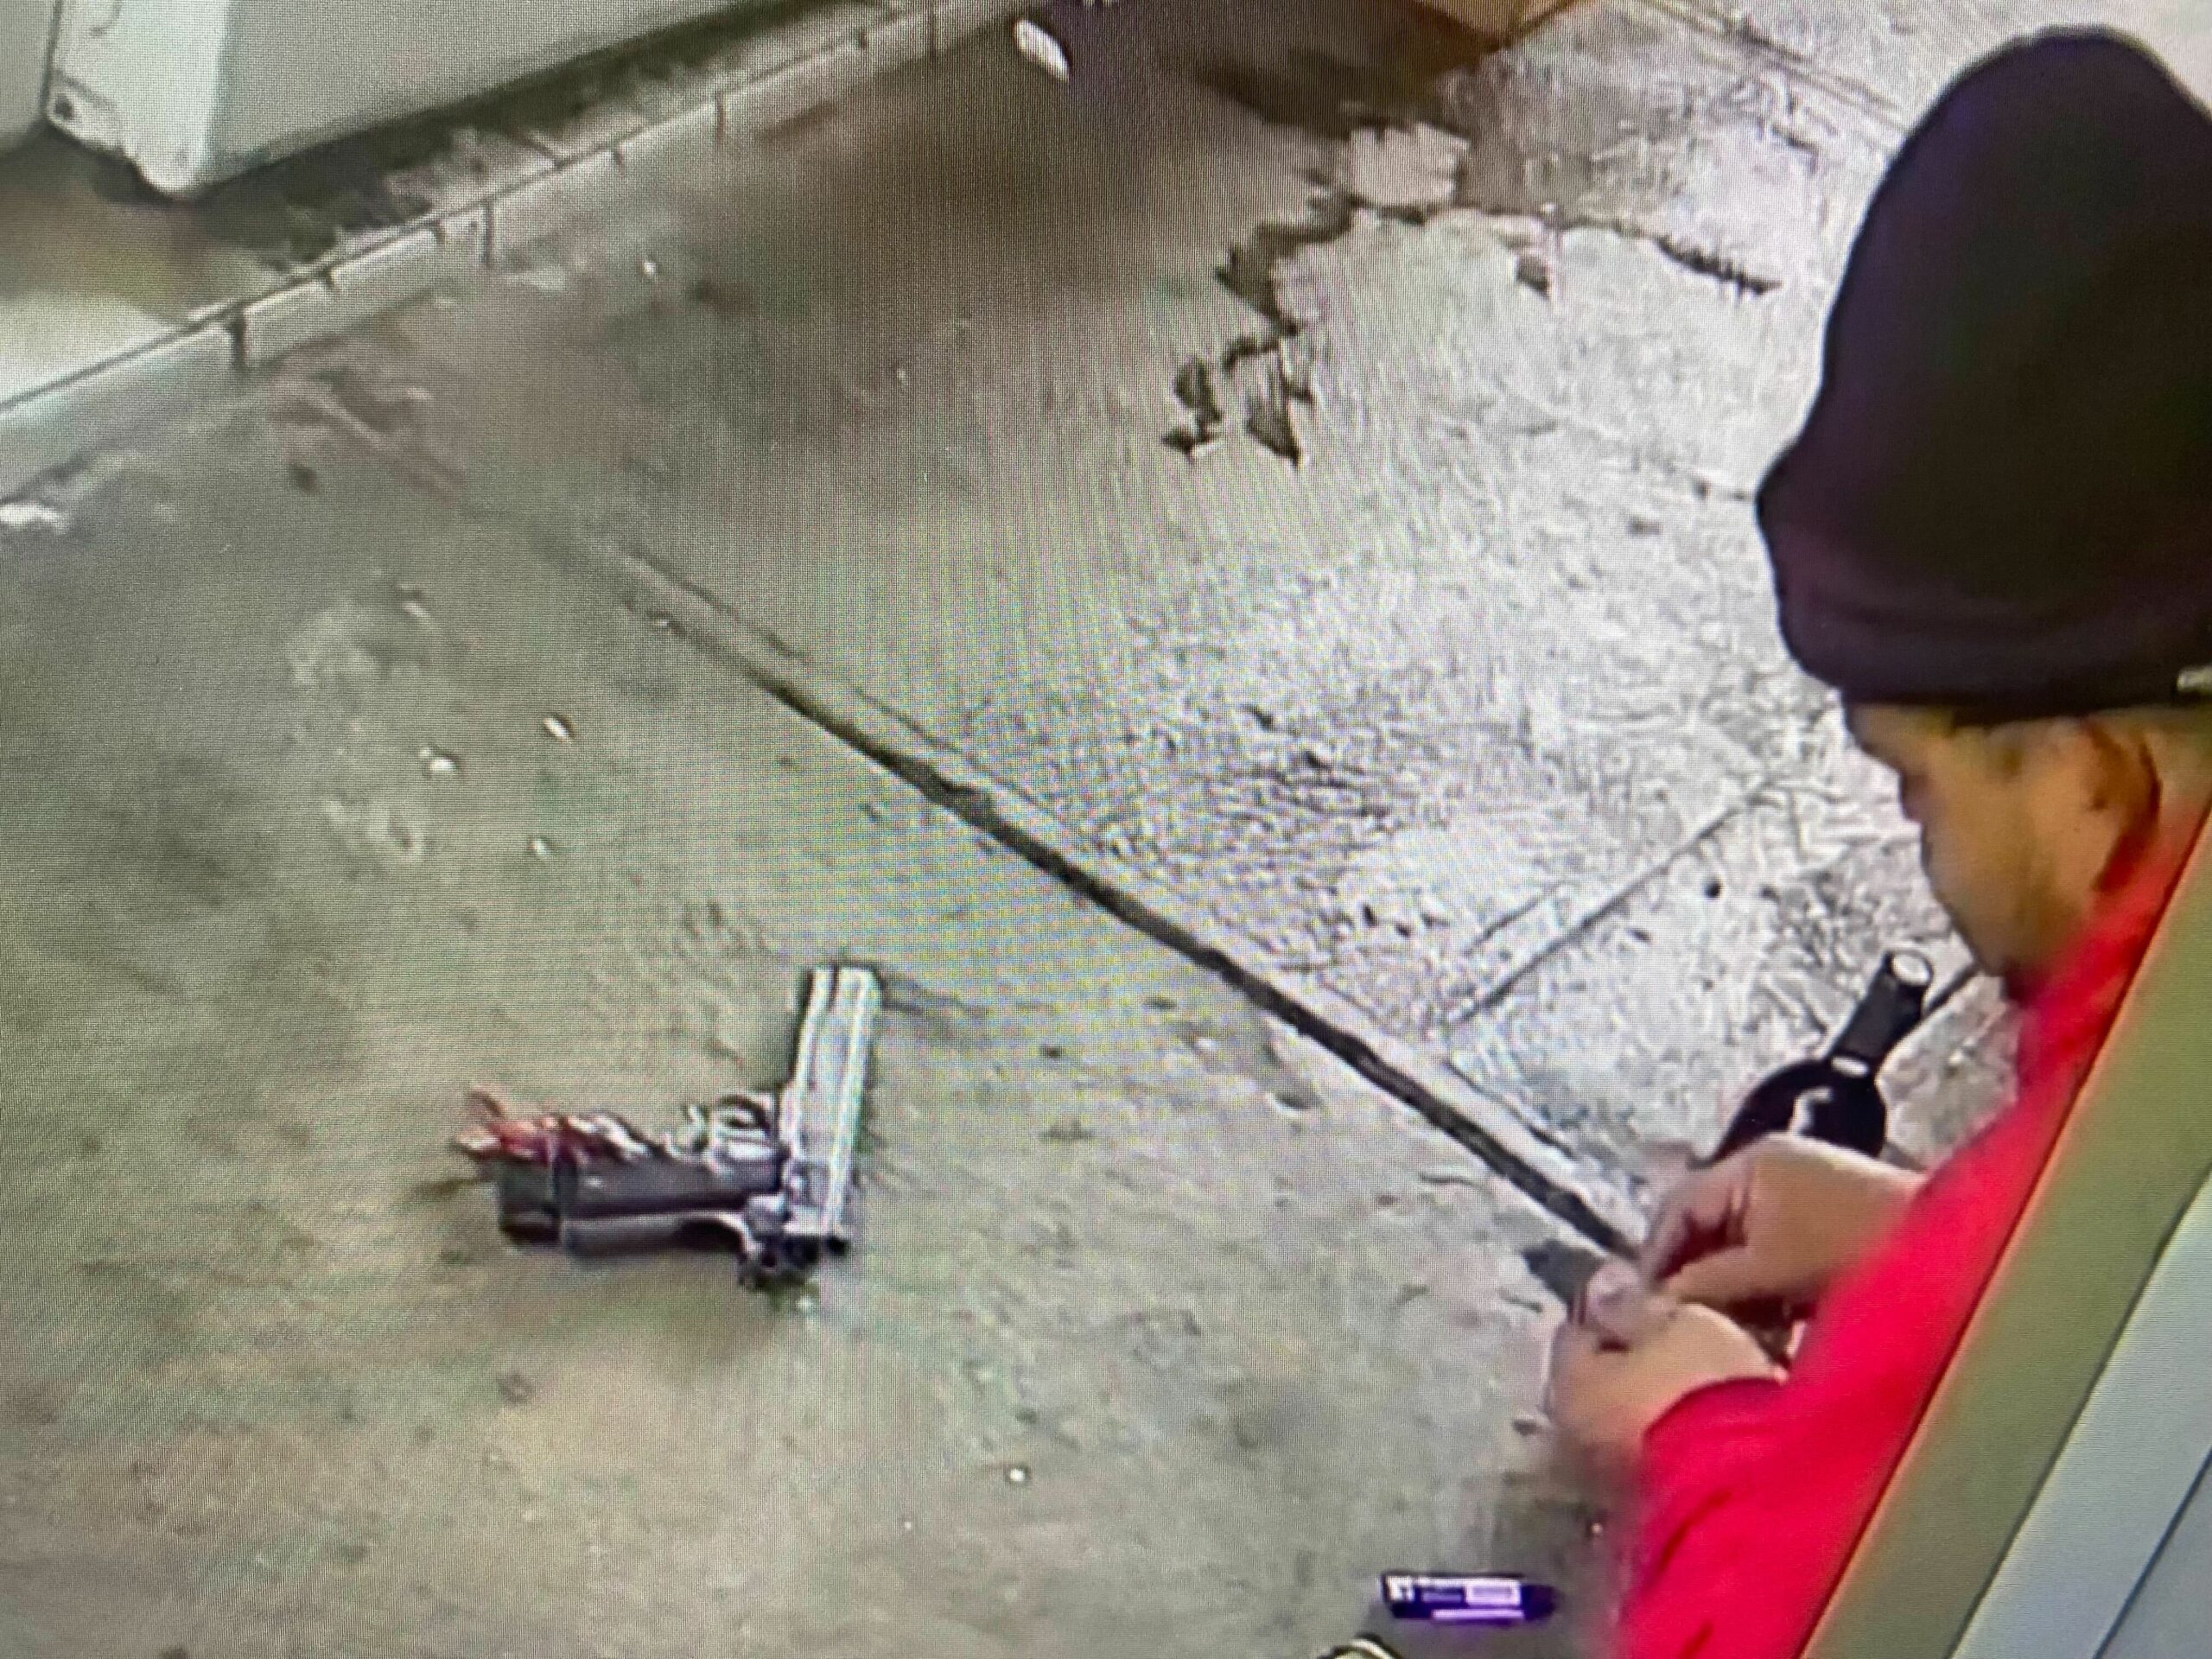 Video of SFPD Shooting Shows Man Snorting Cocaine Before Being Killed 